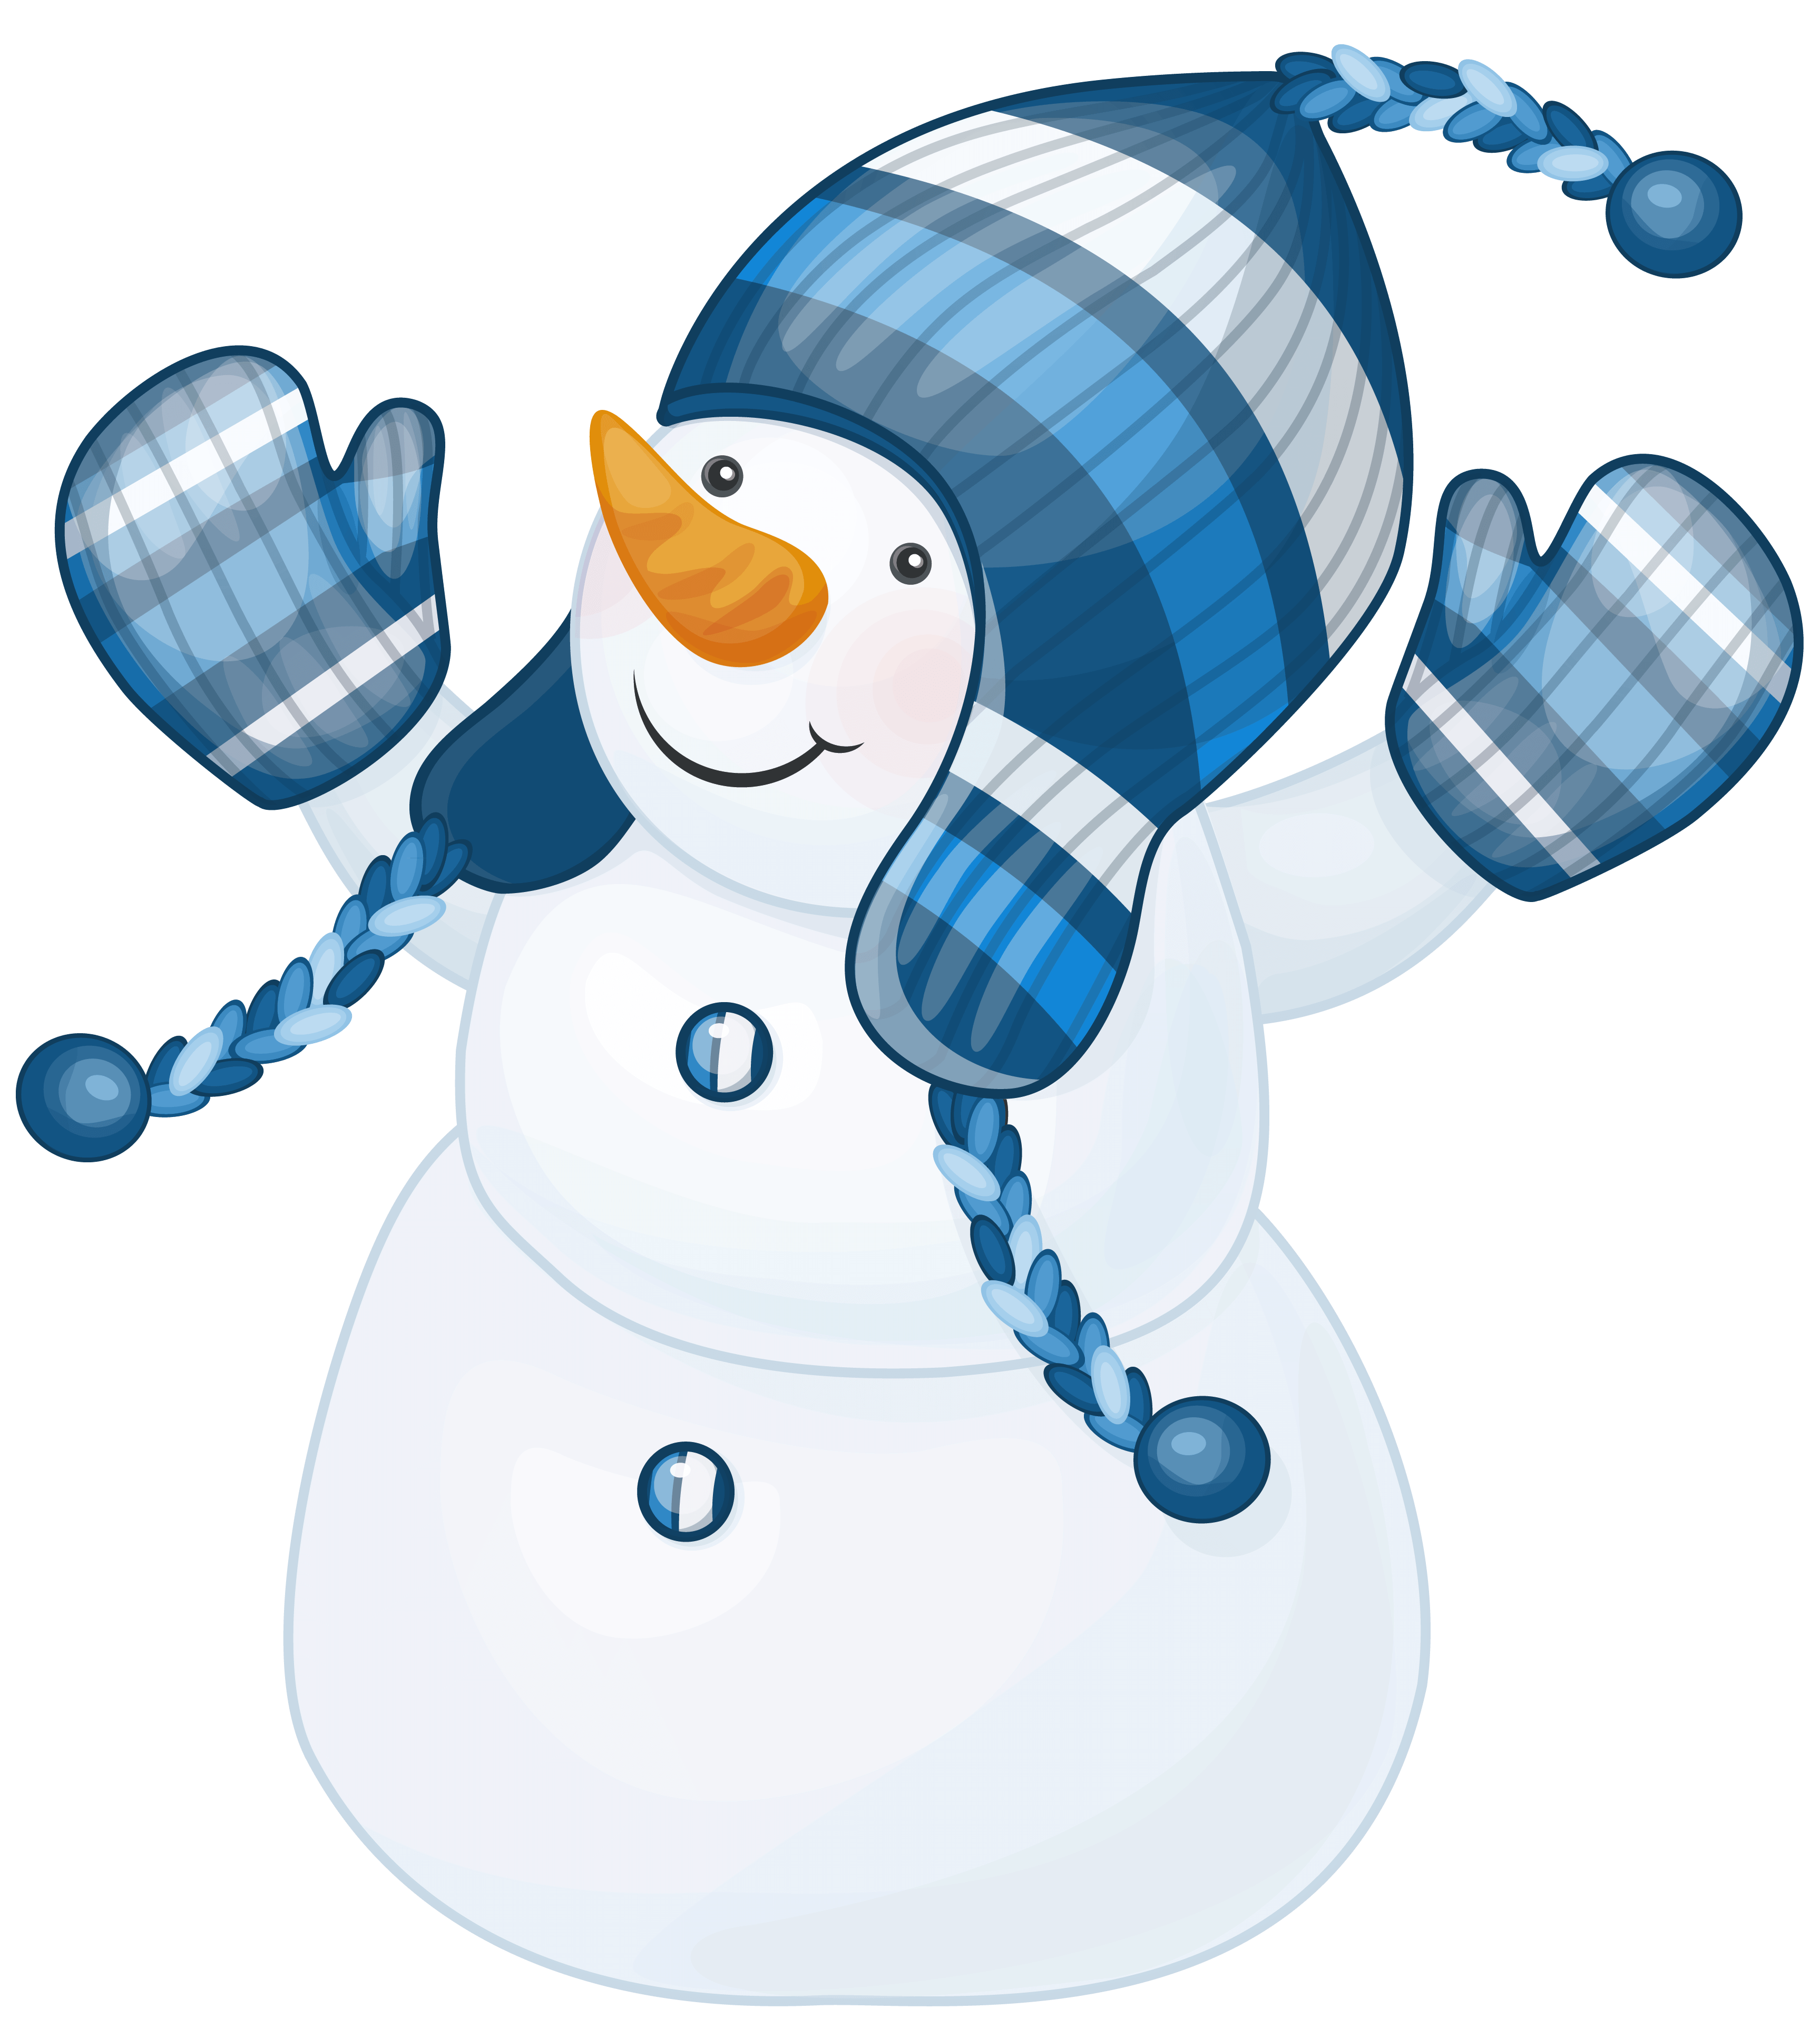 Black and white snowman catching snowflakes clip art black and